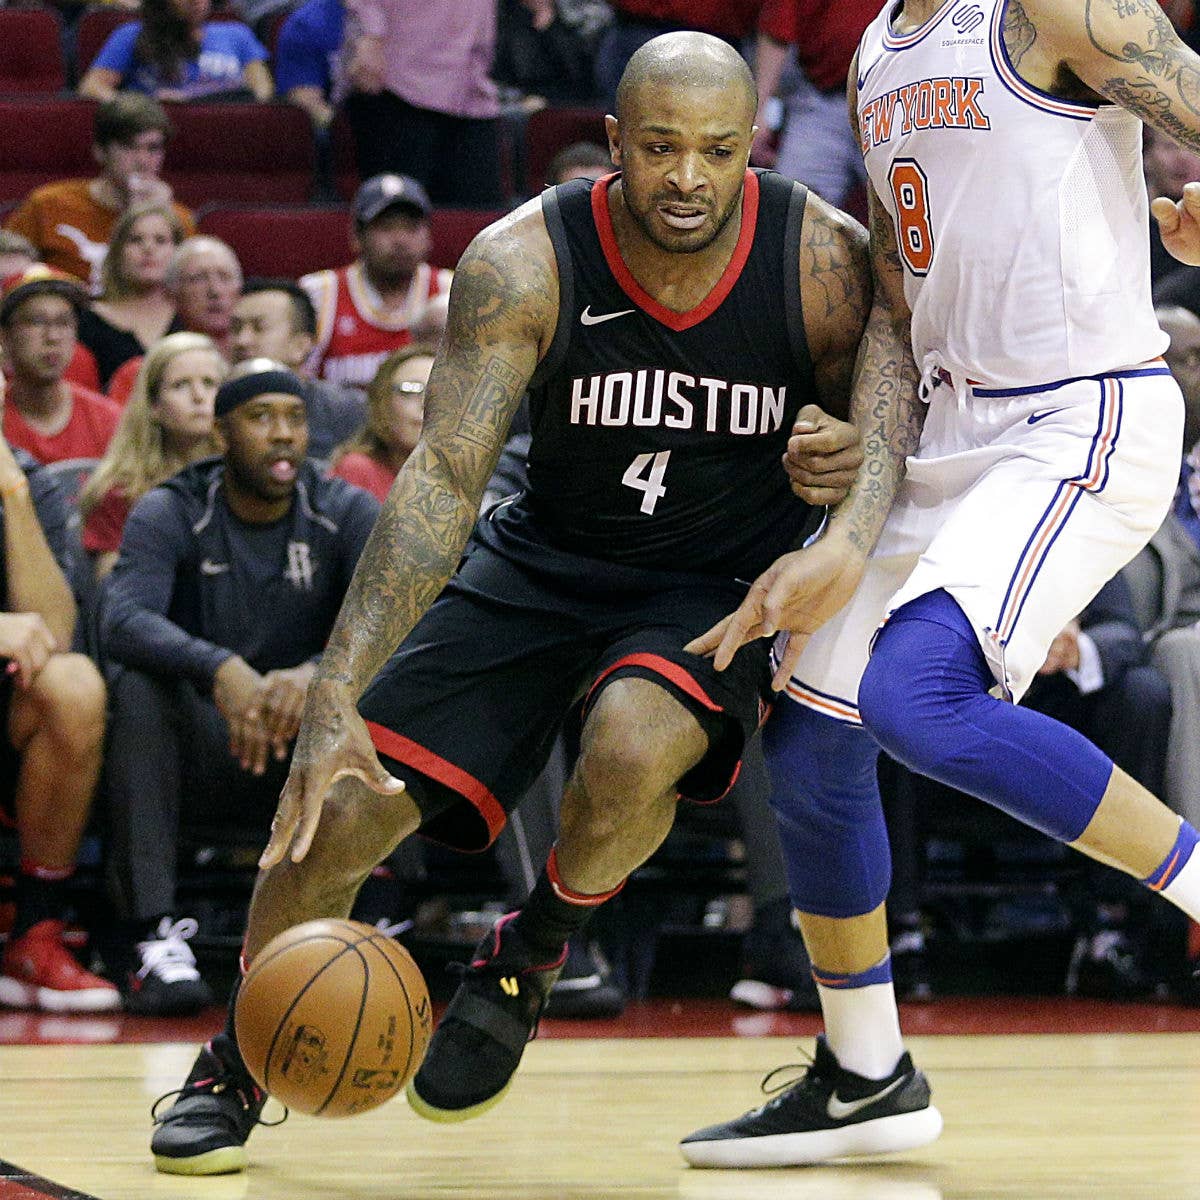 SoleWatch: P.J. Tucker Has Played in Every Nike Air Yeezy 2